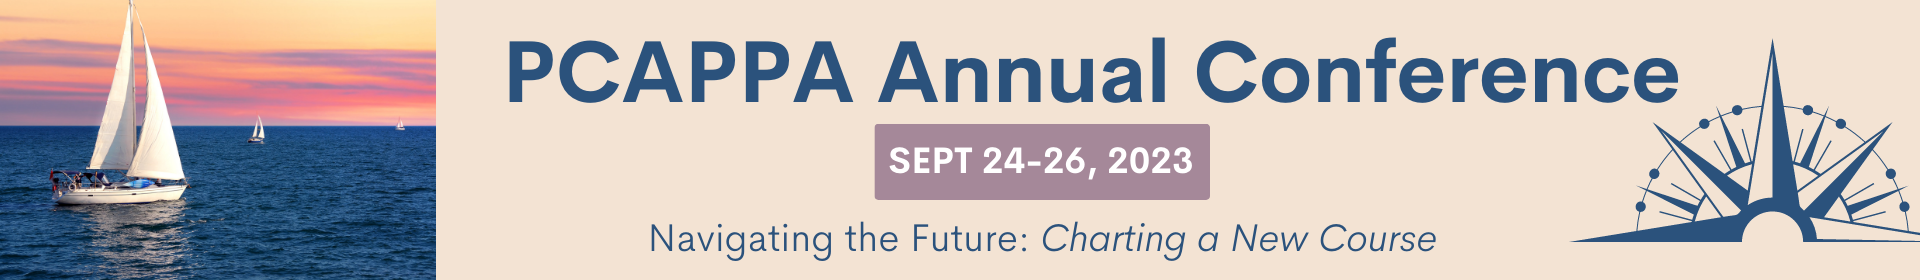 PCAPPA 2023 Annual Conference  Event Banner